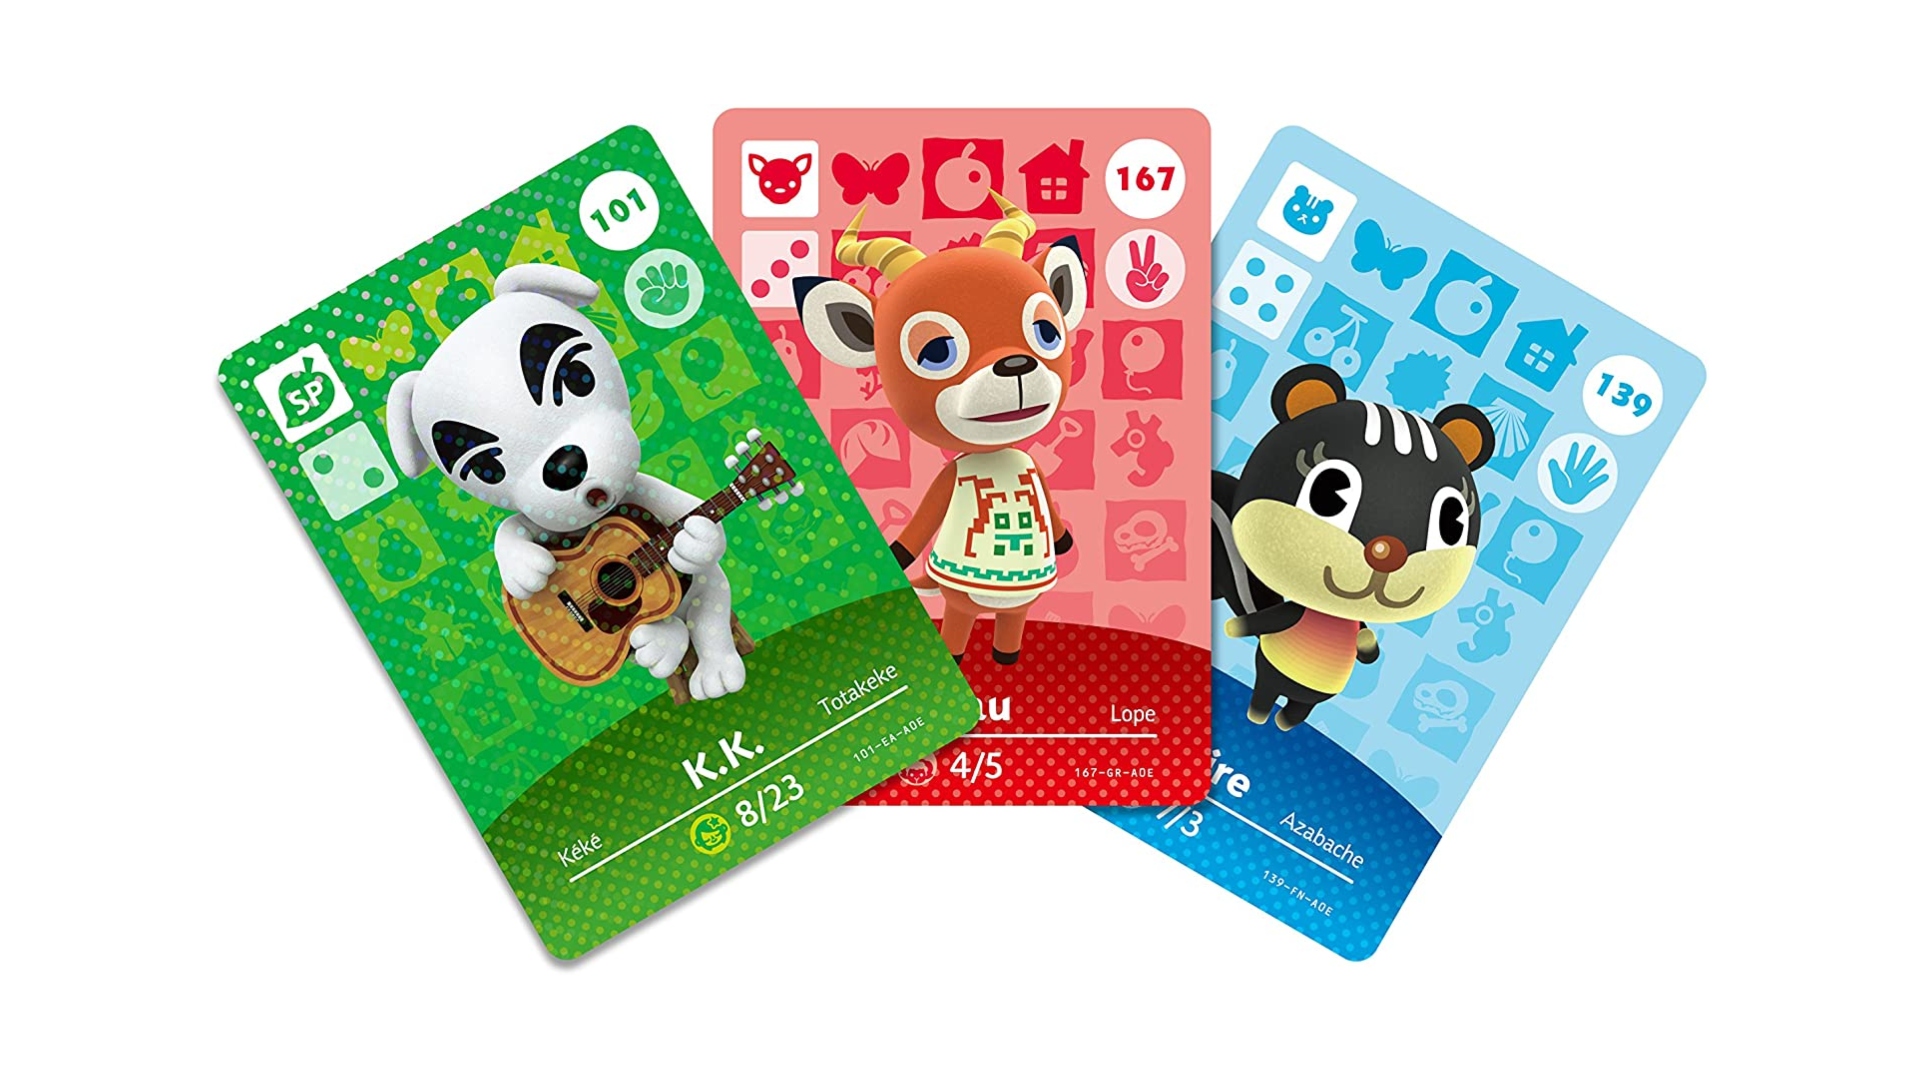 Animal Crossing amiibo cards, showing three of them, including KK, Beau, and Blaire.